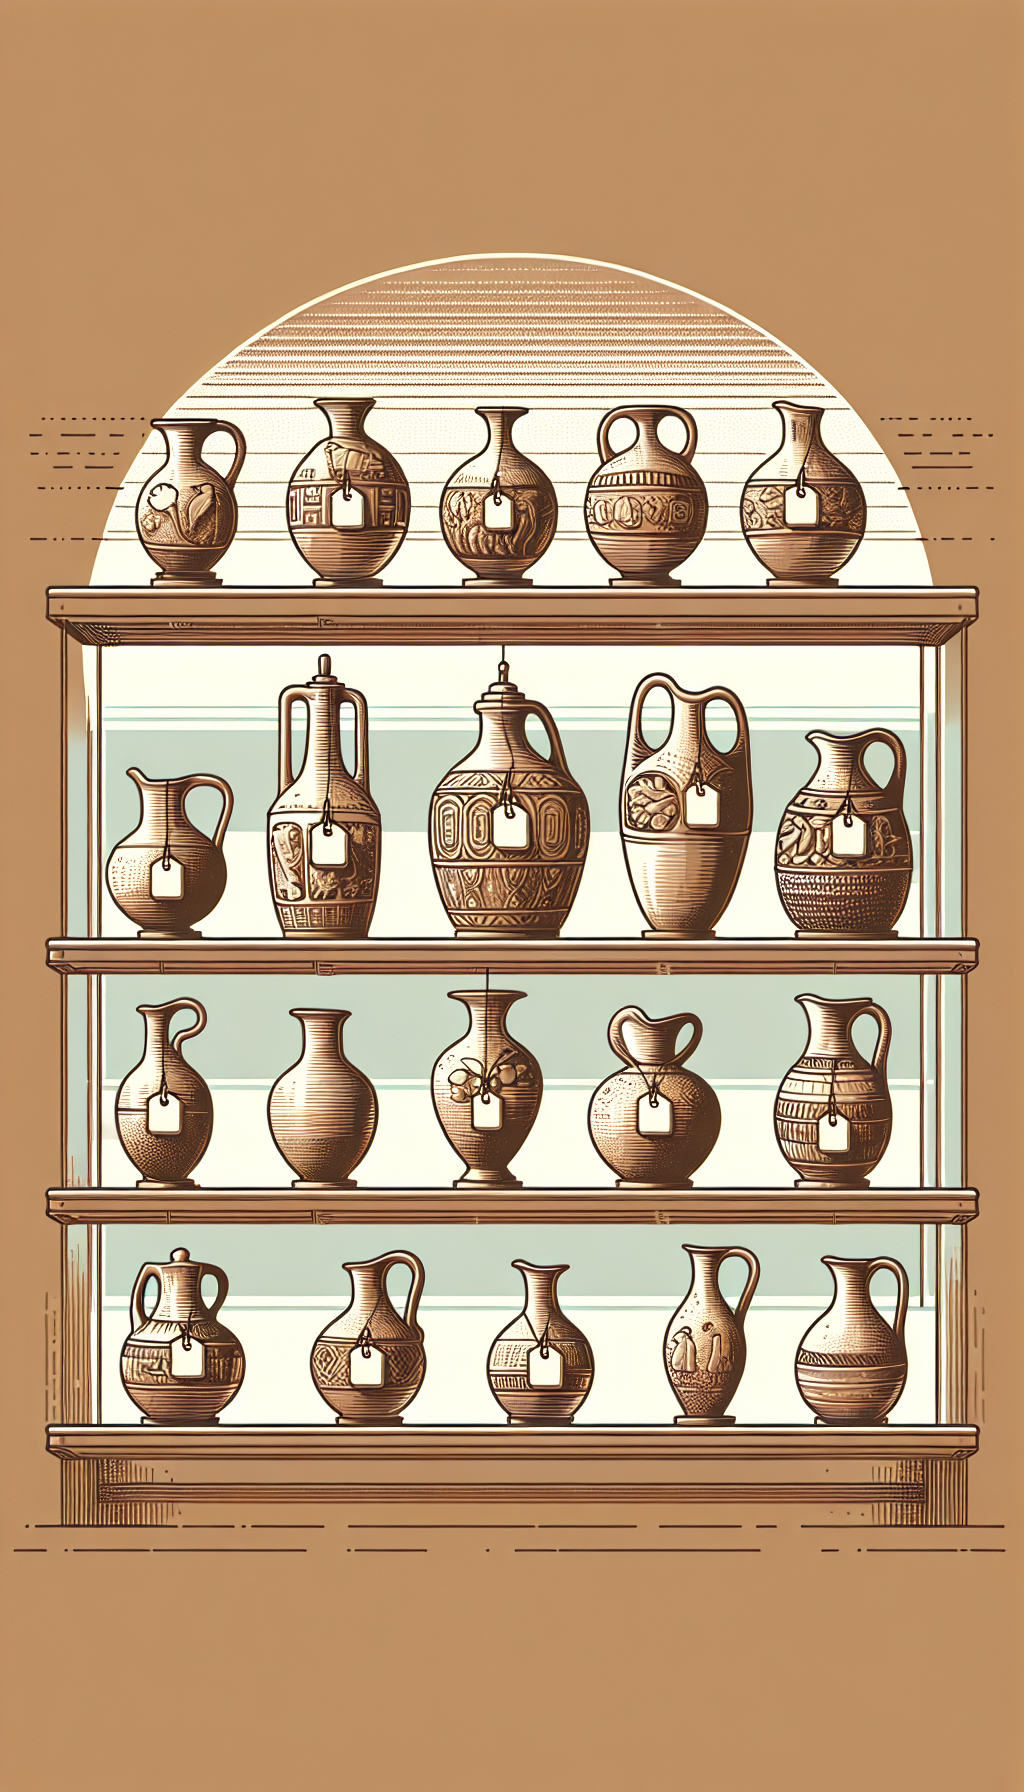 An illustration showcases a collection of stoneware jugs of varying styles and sizes, arrayed on translucent shelving that connotes their value hierarchy. The jugs feature assorted designs, from the simplest to the most ornate, each with a price tag reflecting its worth. The background subtly shifts in color, representing the spectrum of historic periods and stylistic influences.